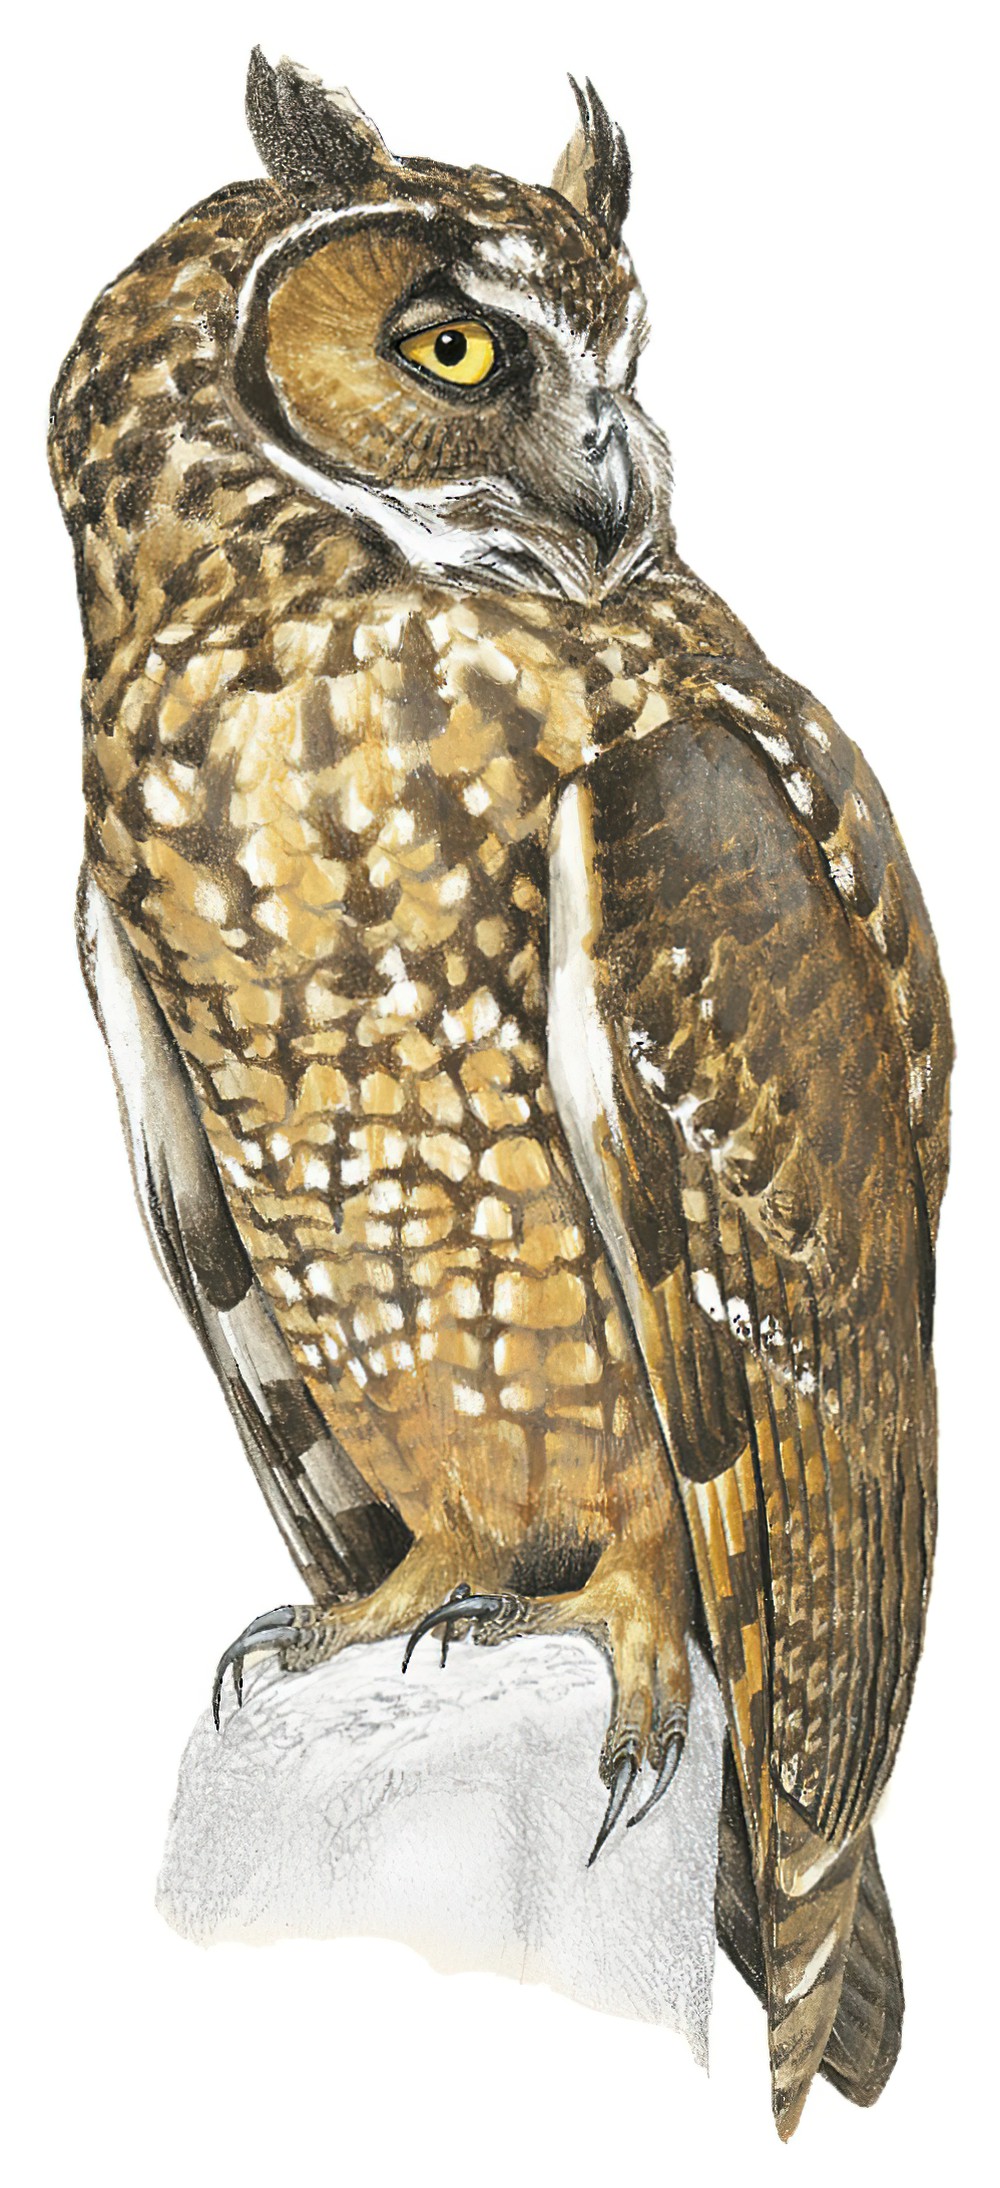 Abyssinian Owl / Asio abyssinicus